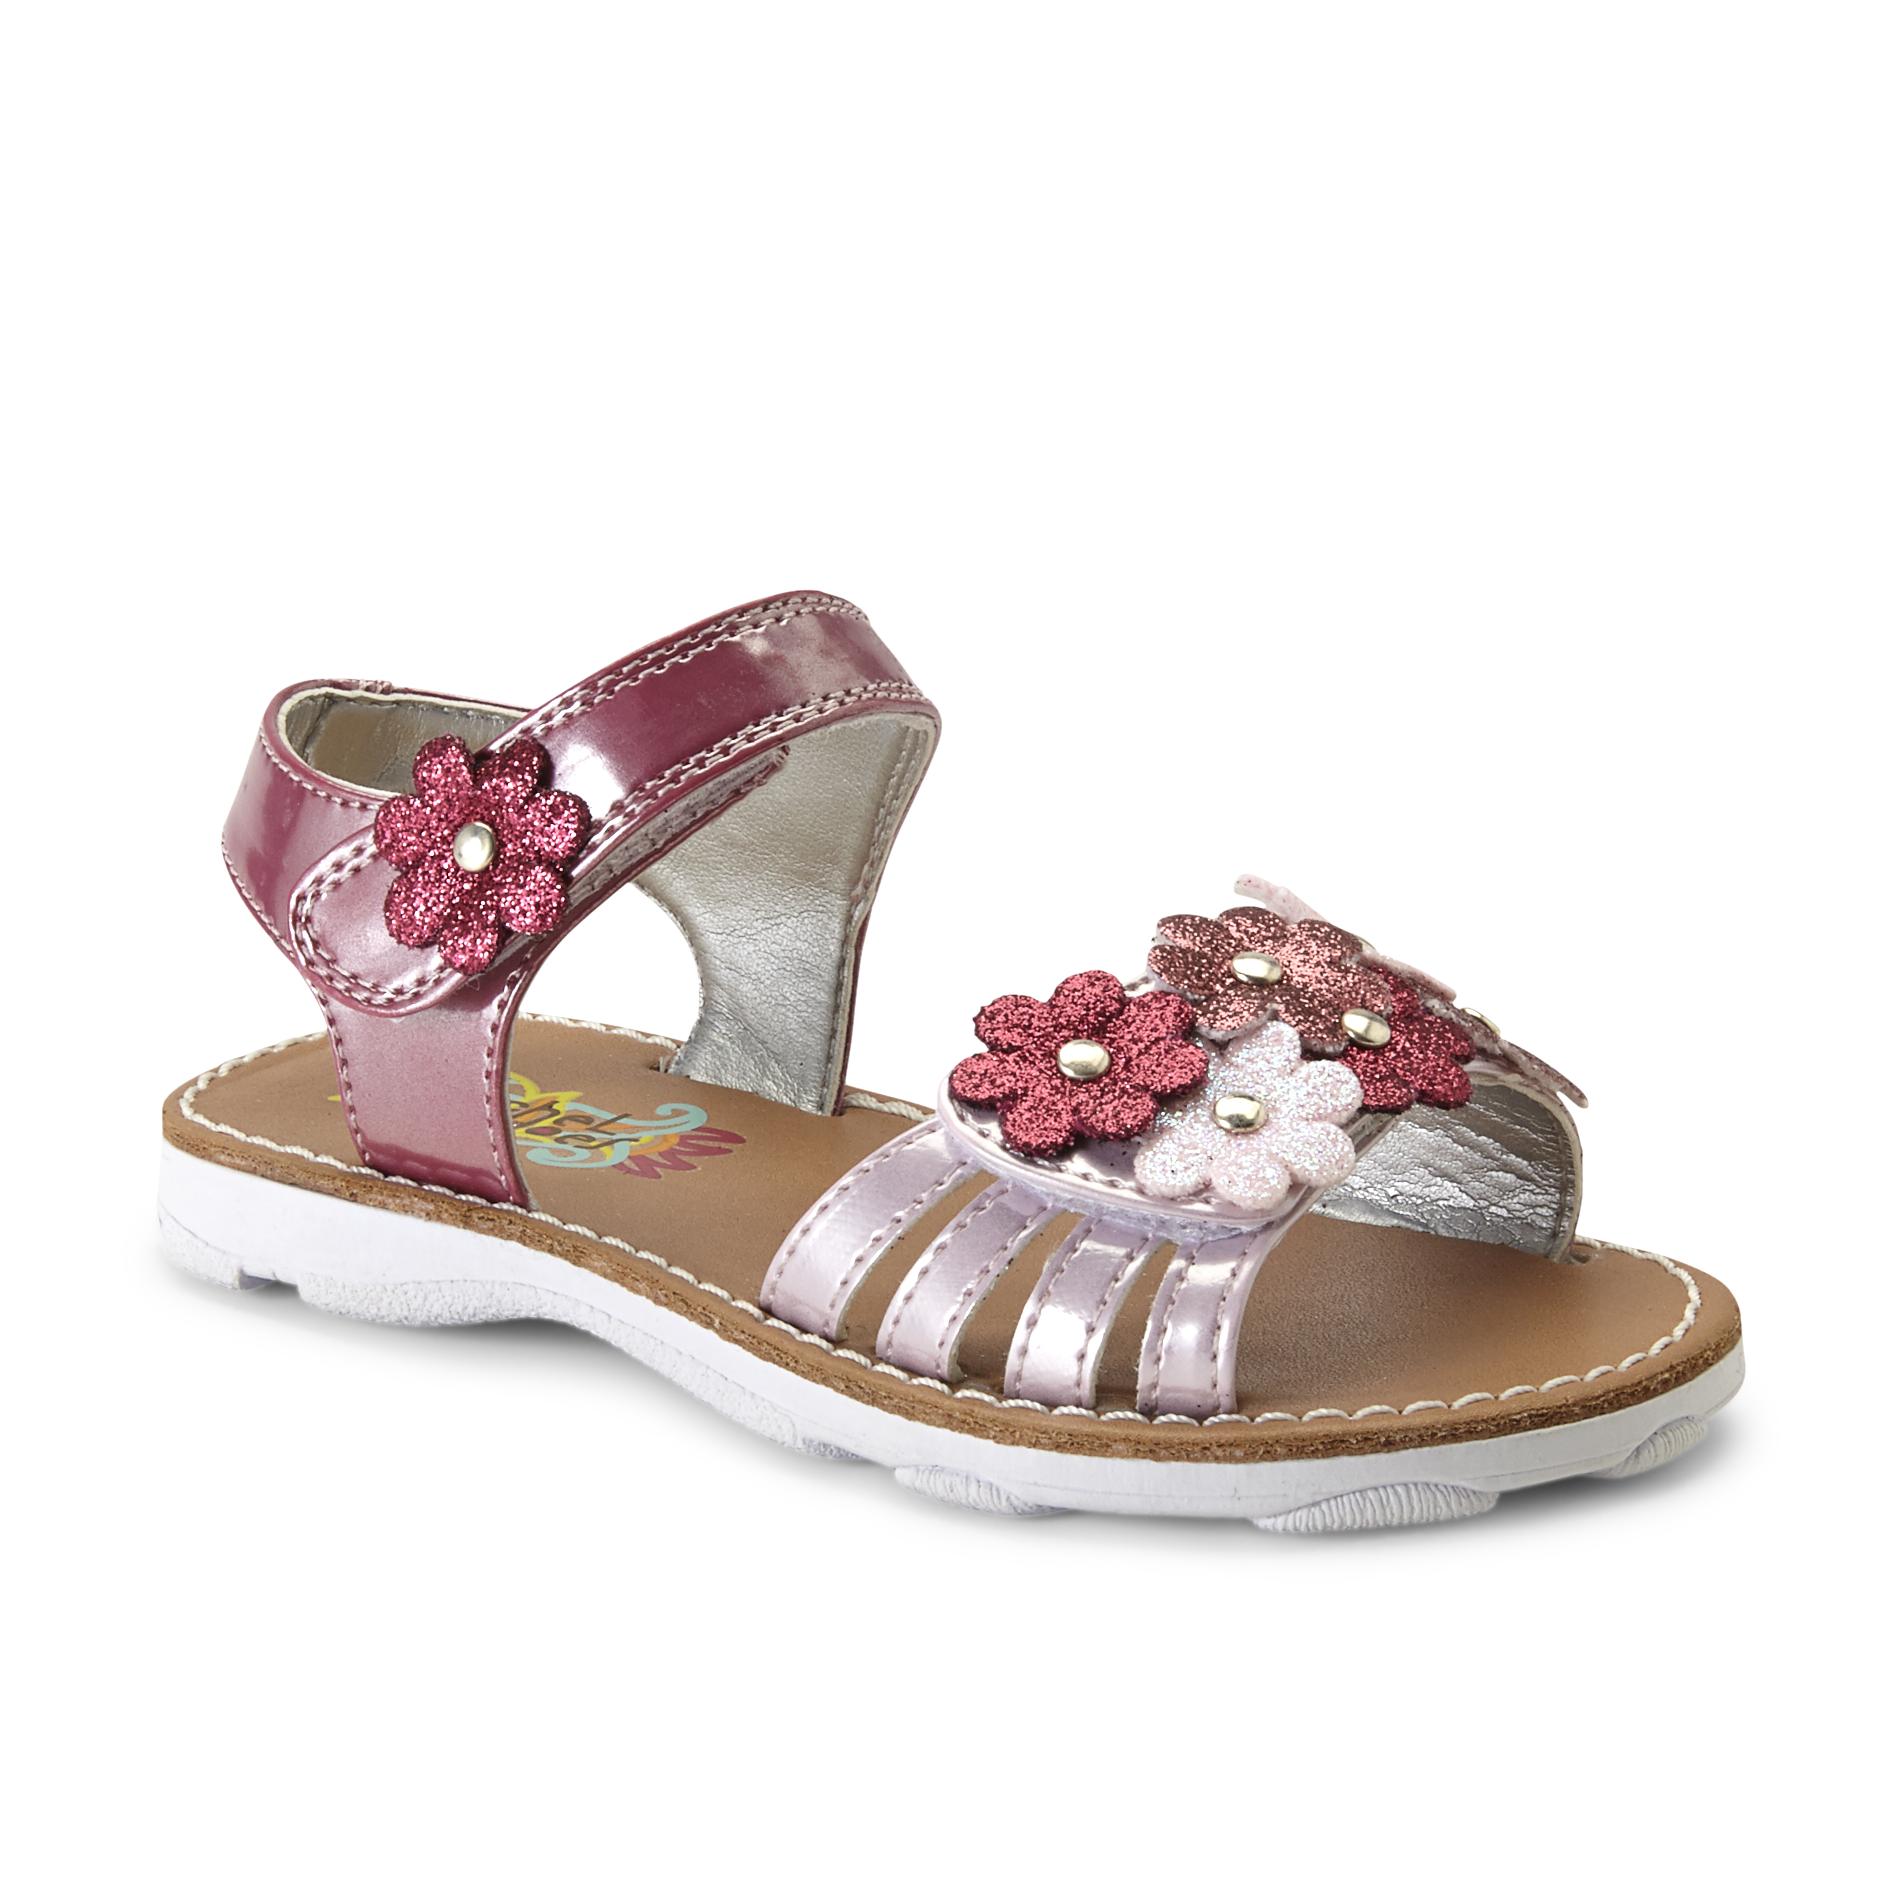 Rachel Shoes Toddler Girl's Shea Pink Pearlized Sandal